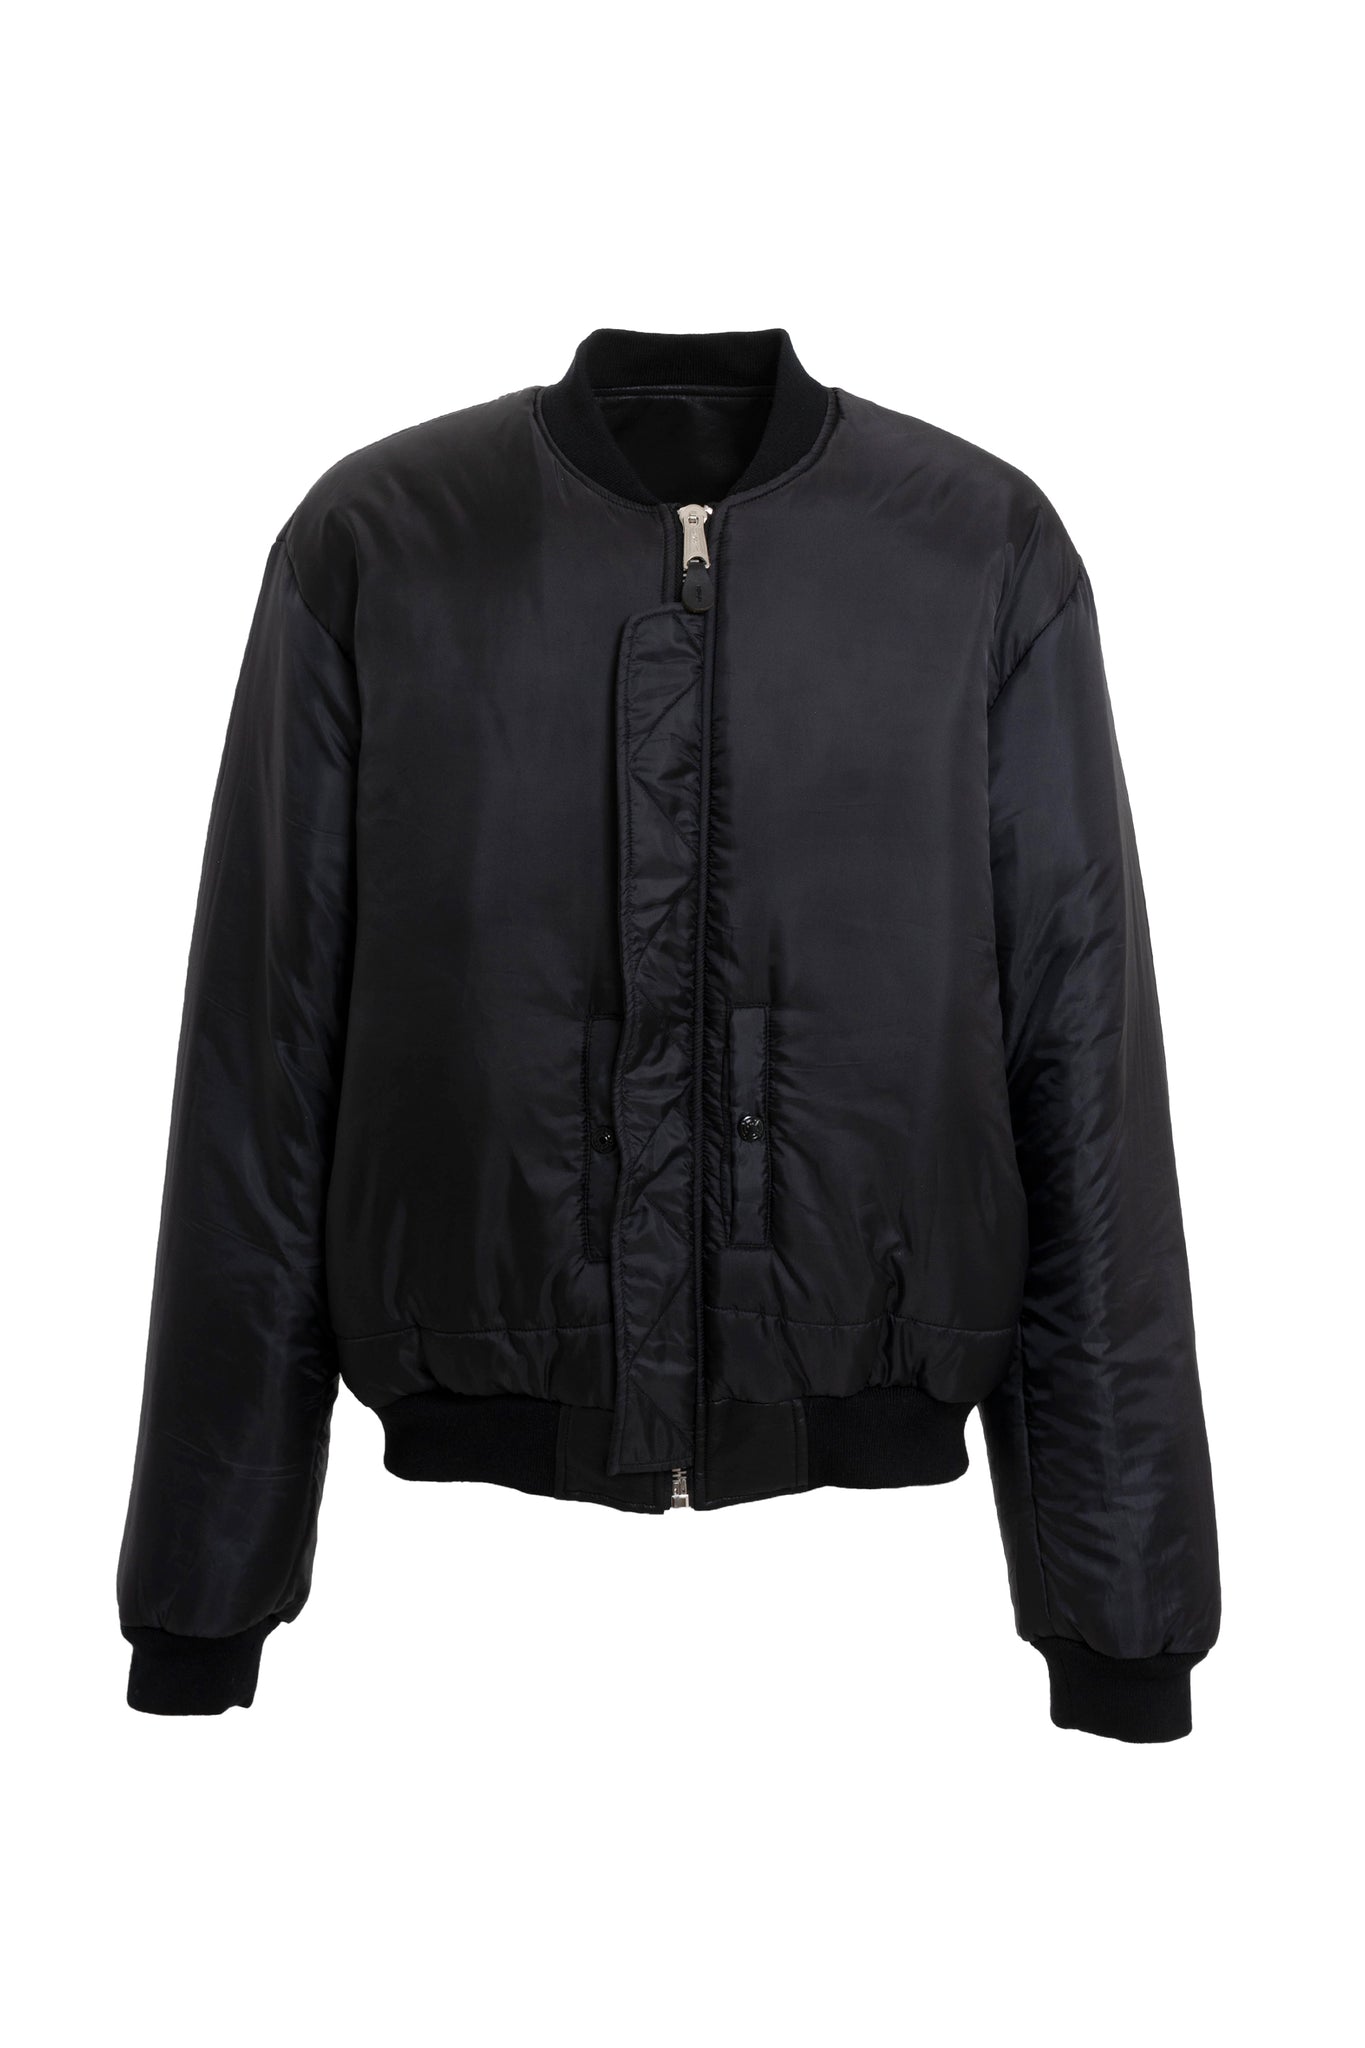 × F.M.C.D SYNTHETIC LEATHER BOMBER JACKET / BLACK